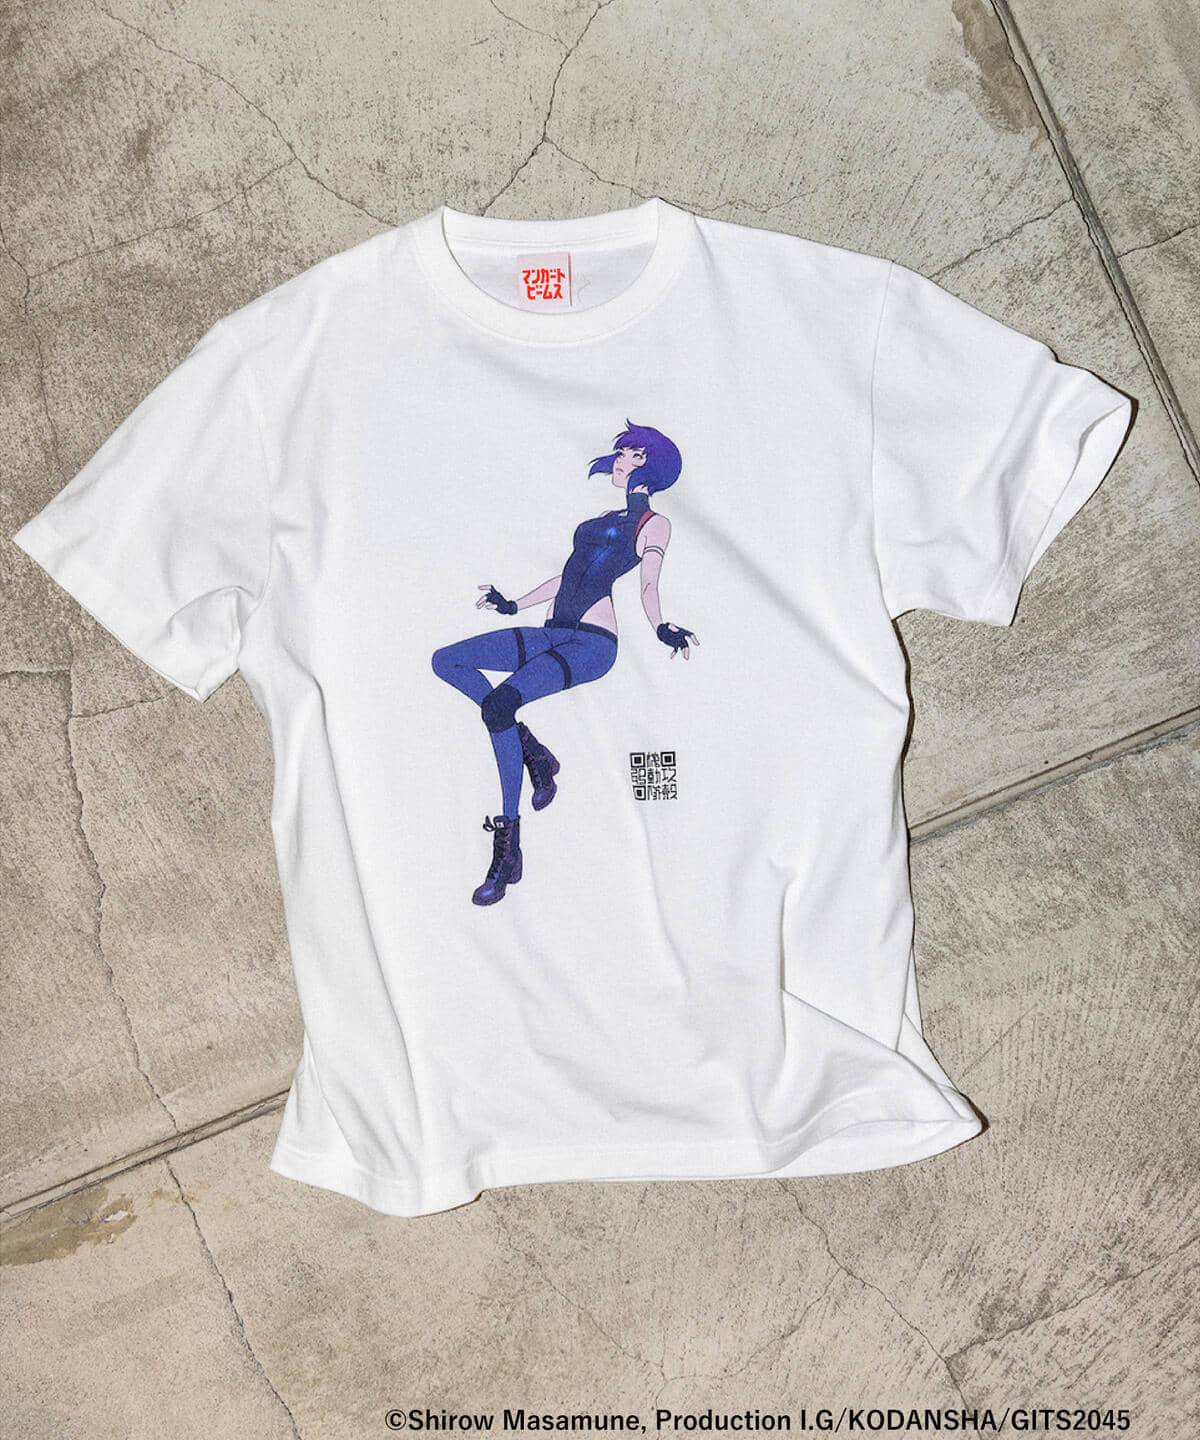 GHOST IN THE SHELL 攻殻機動隊 Tシャツ 草薙素子 | kensysgas.com